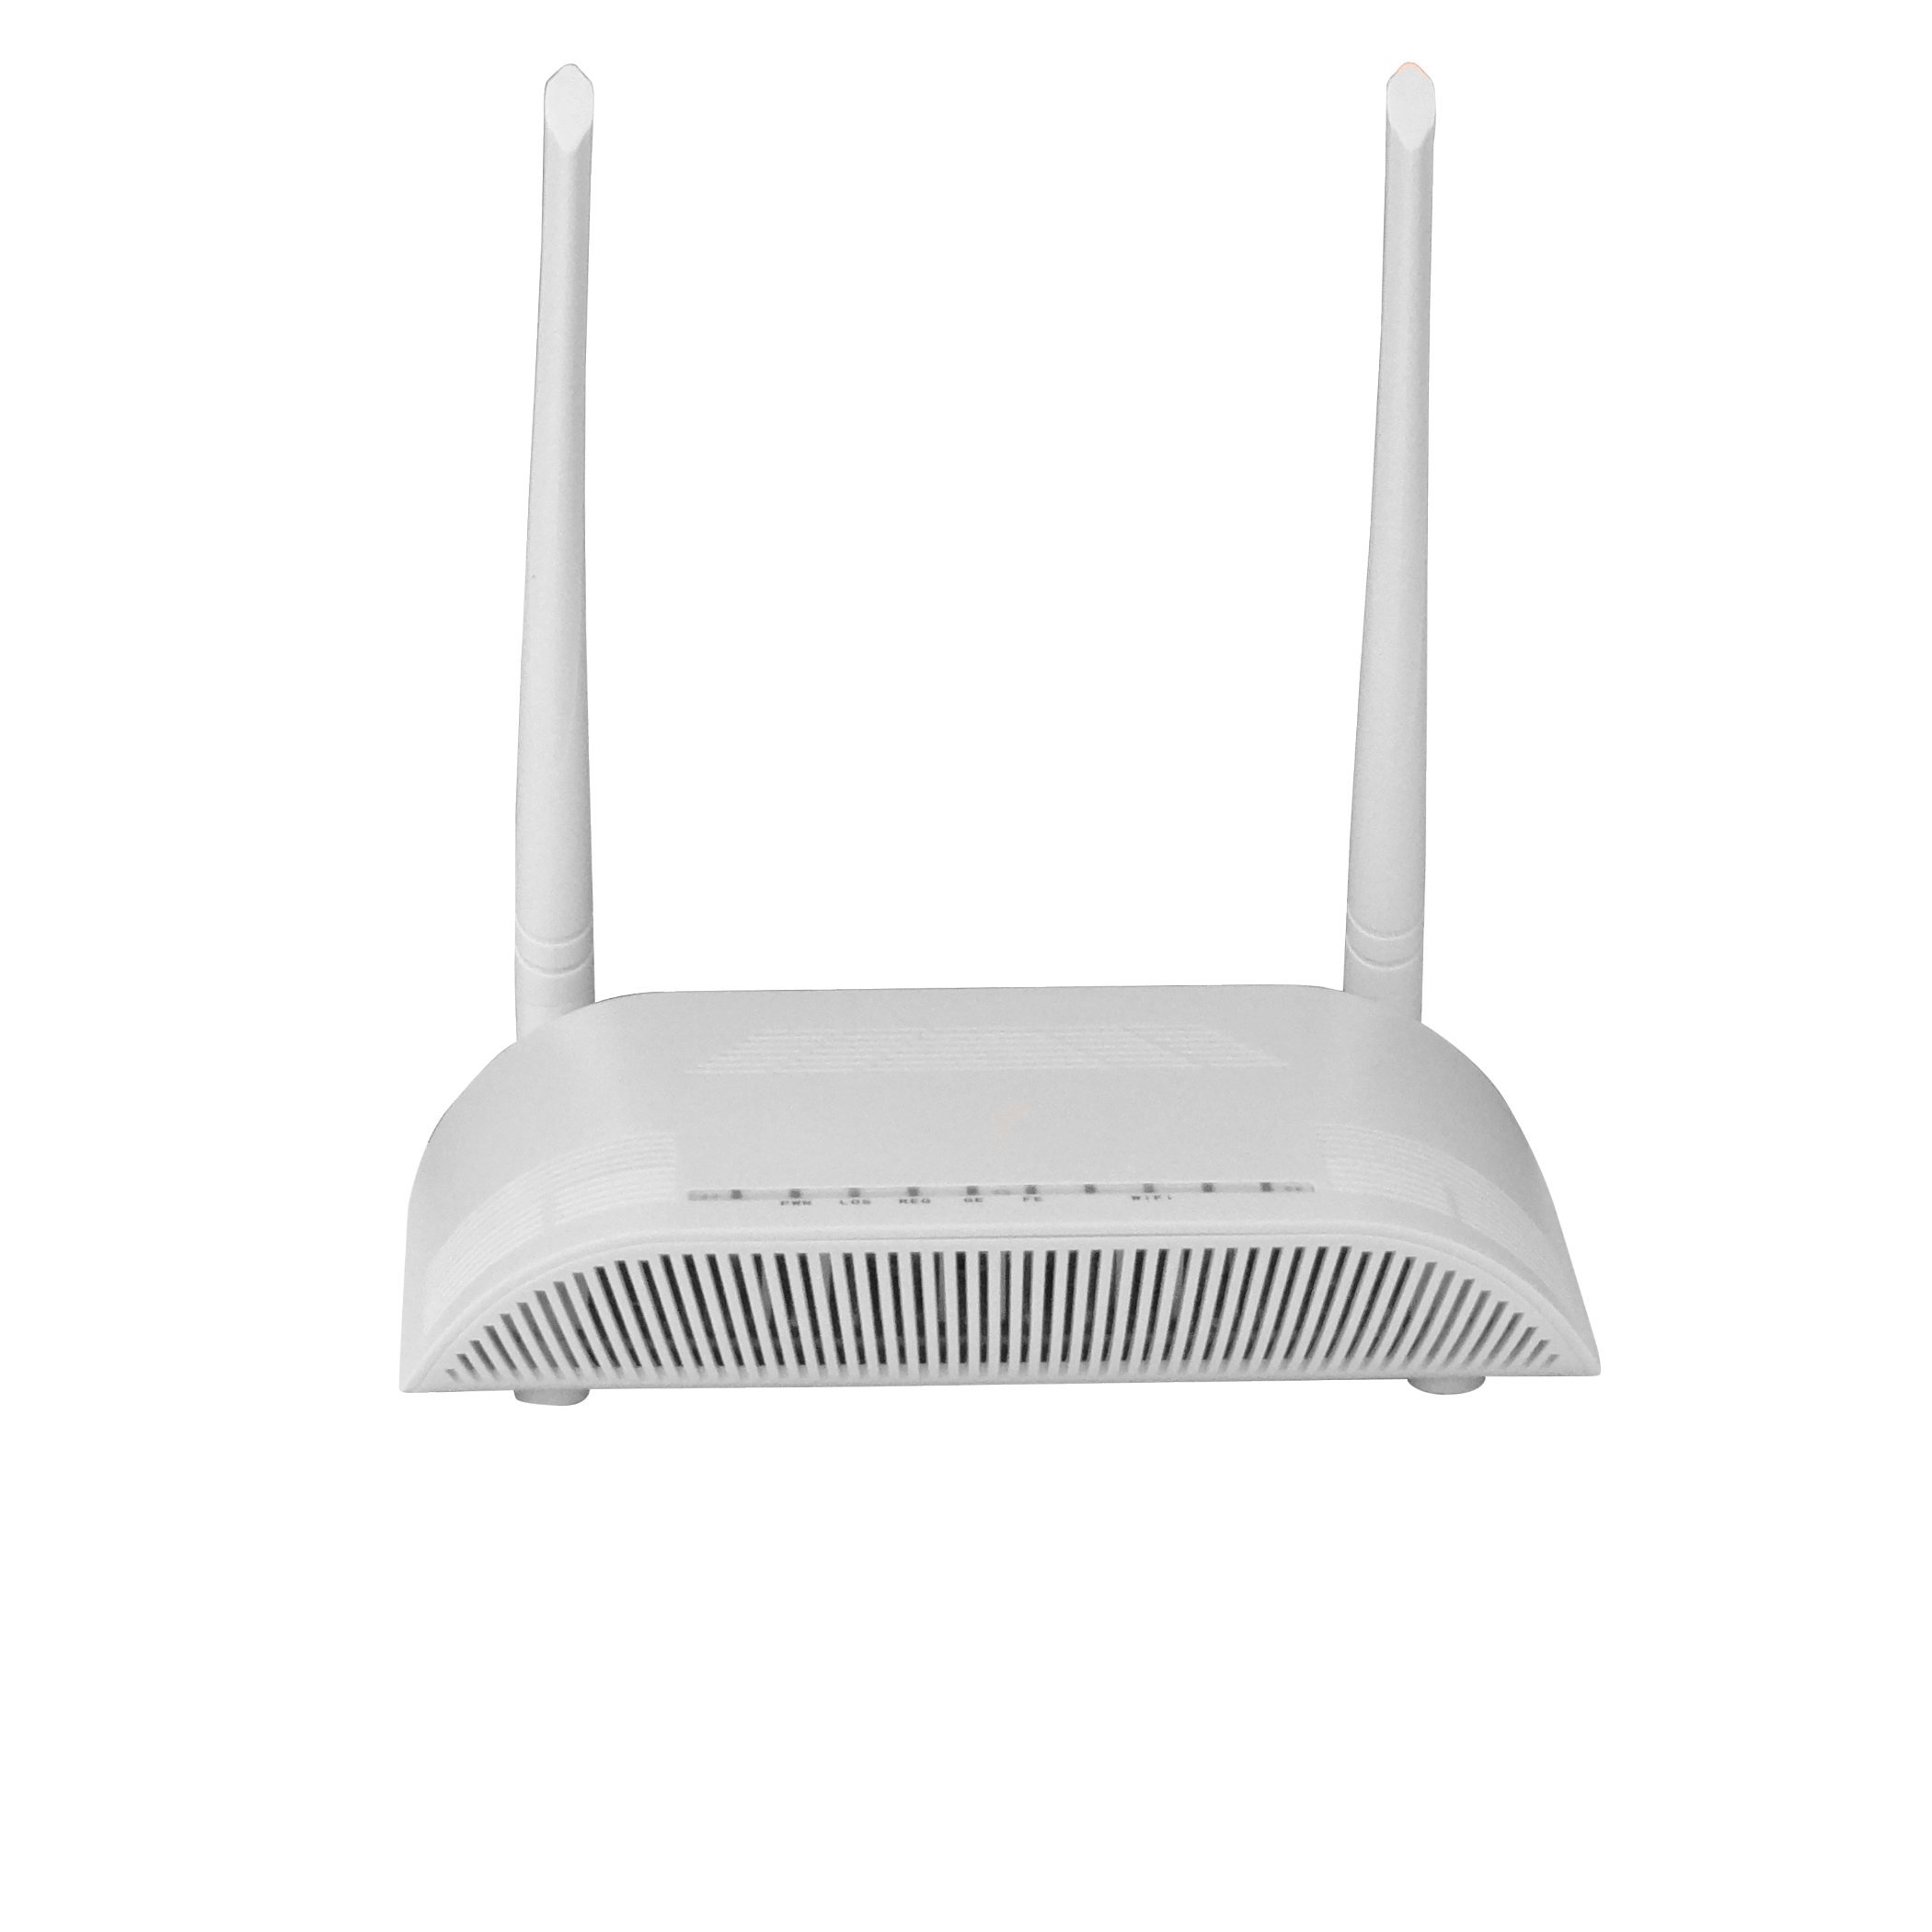 TL-WA850RE TP-LINK Antena Interior 300mbps Repetidor WiFi 2,4Ghz 1-100